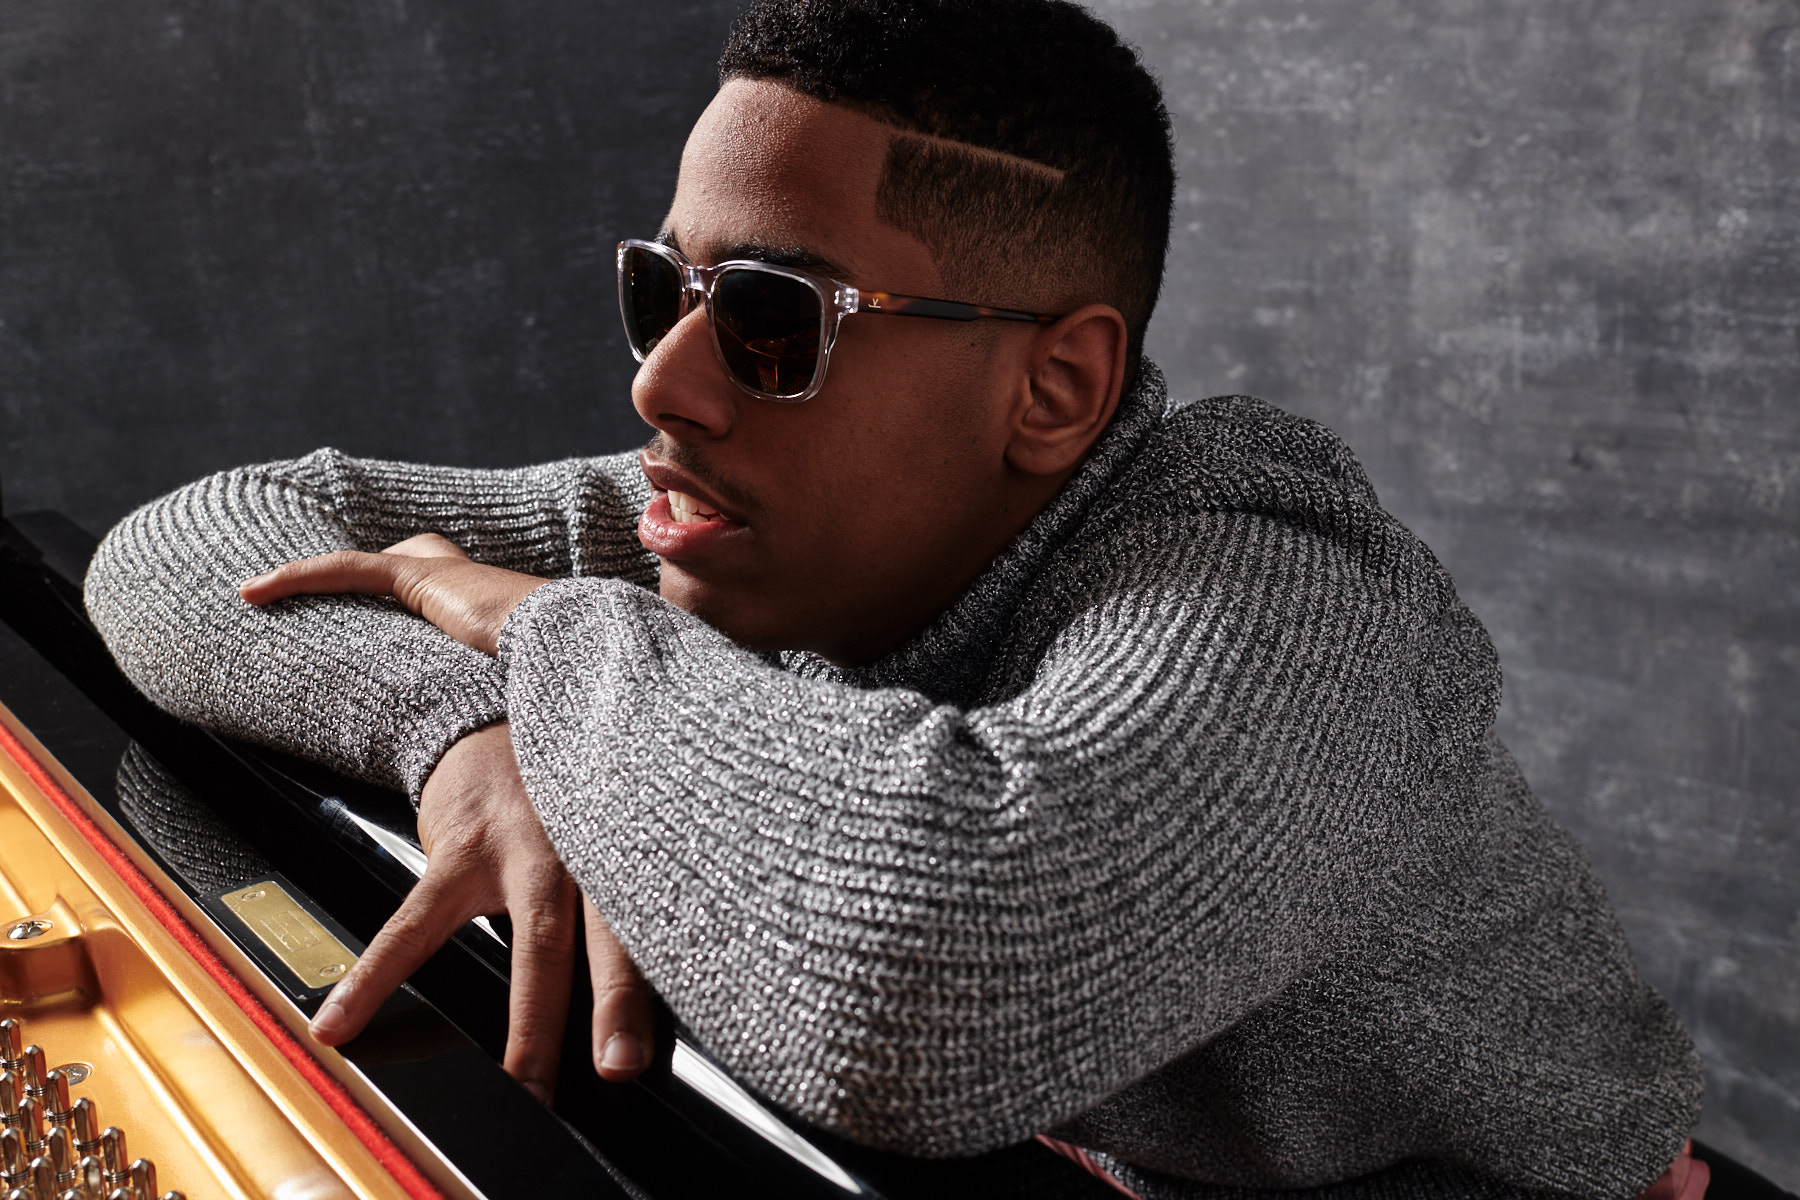 Matthew Whitaker, a young black man wearing sunglasses and a gray sweater, leans on a piano keyboard